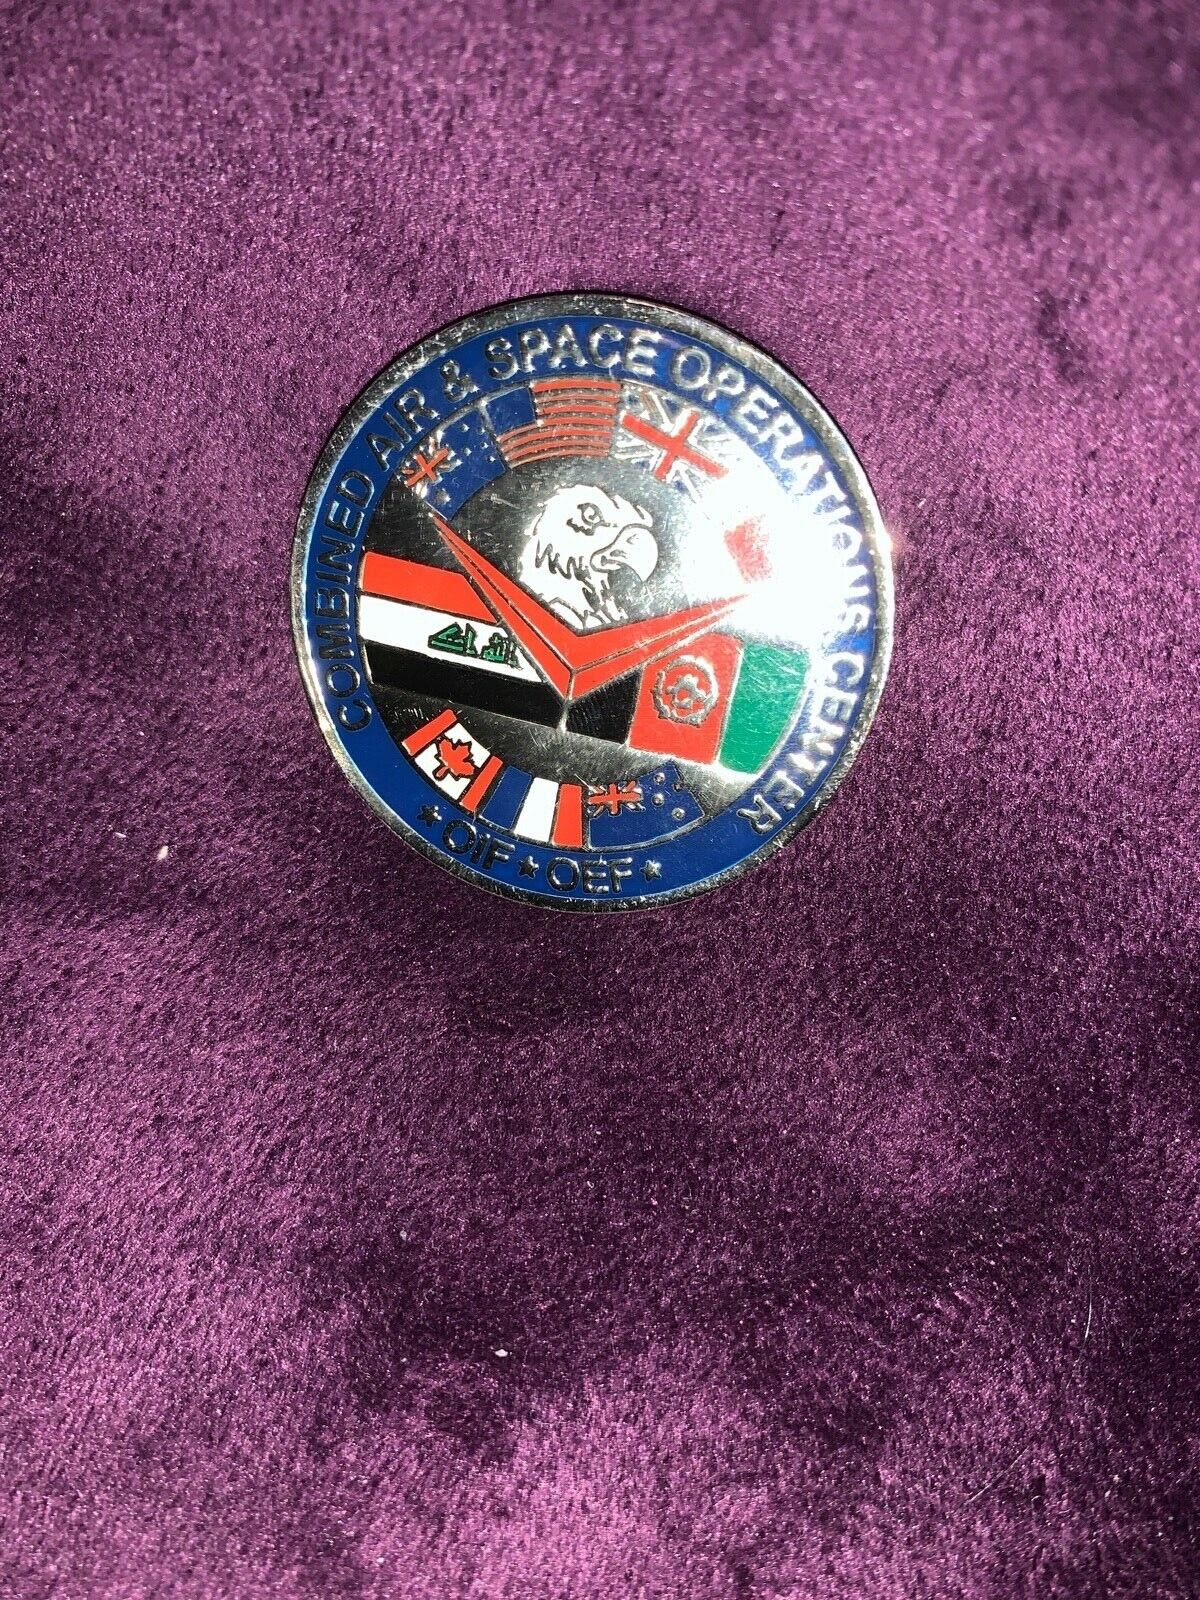 COMBINED AIR & SPACE OPERATIONS CENTER OIF-OEF DEP COMMANDER'S presentation coin